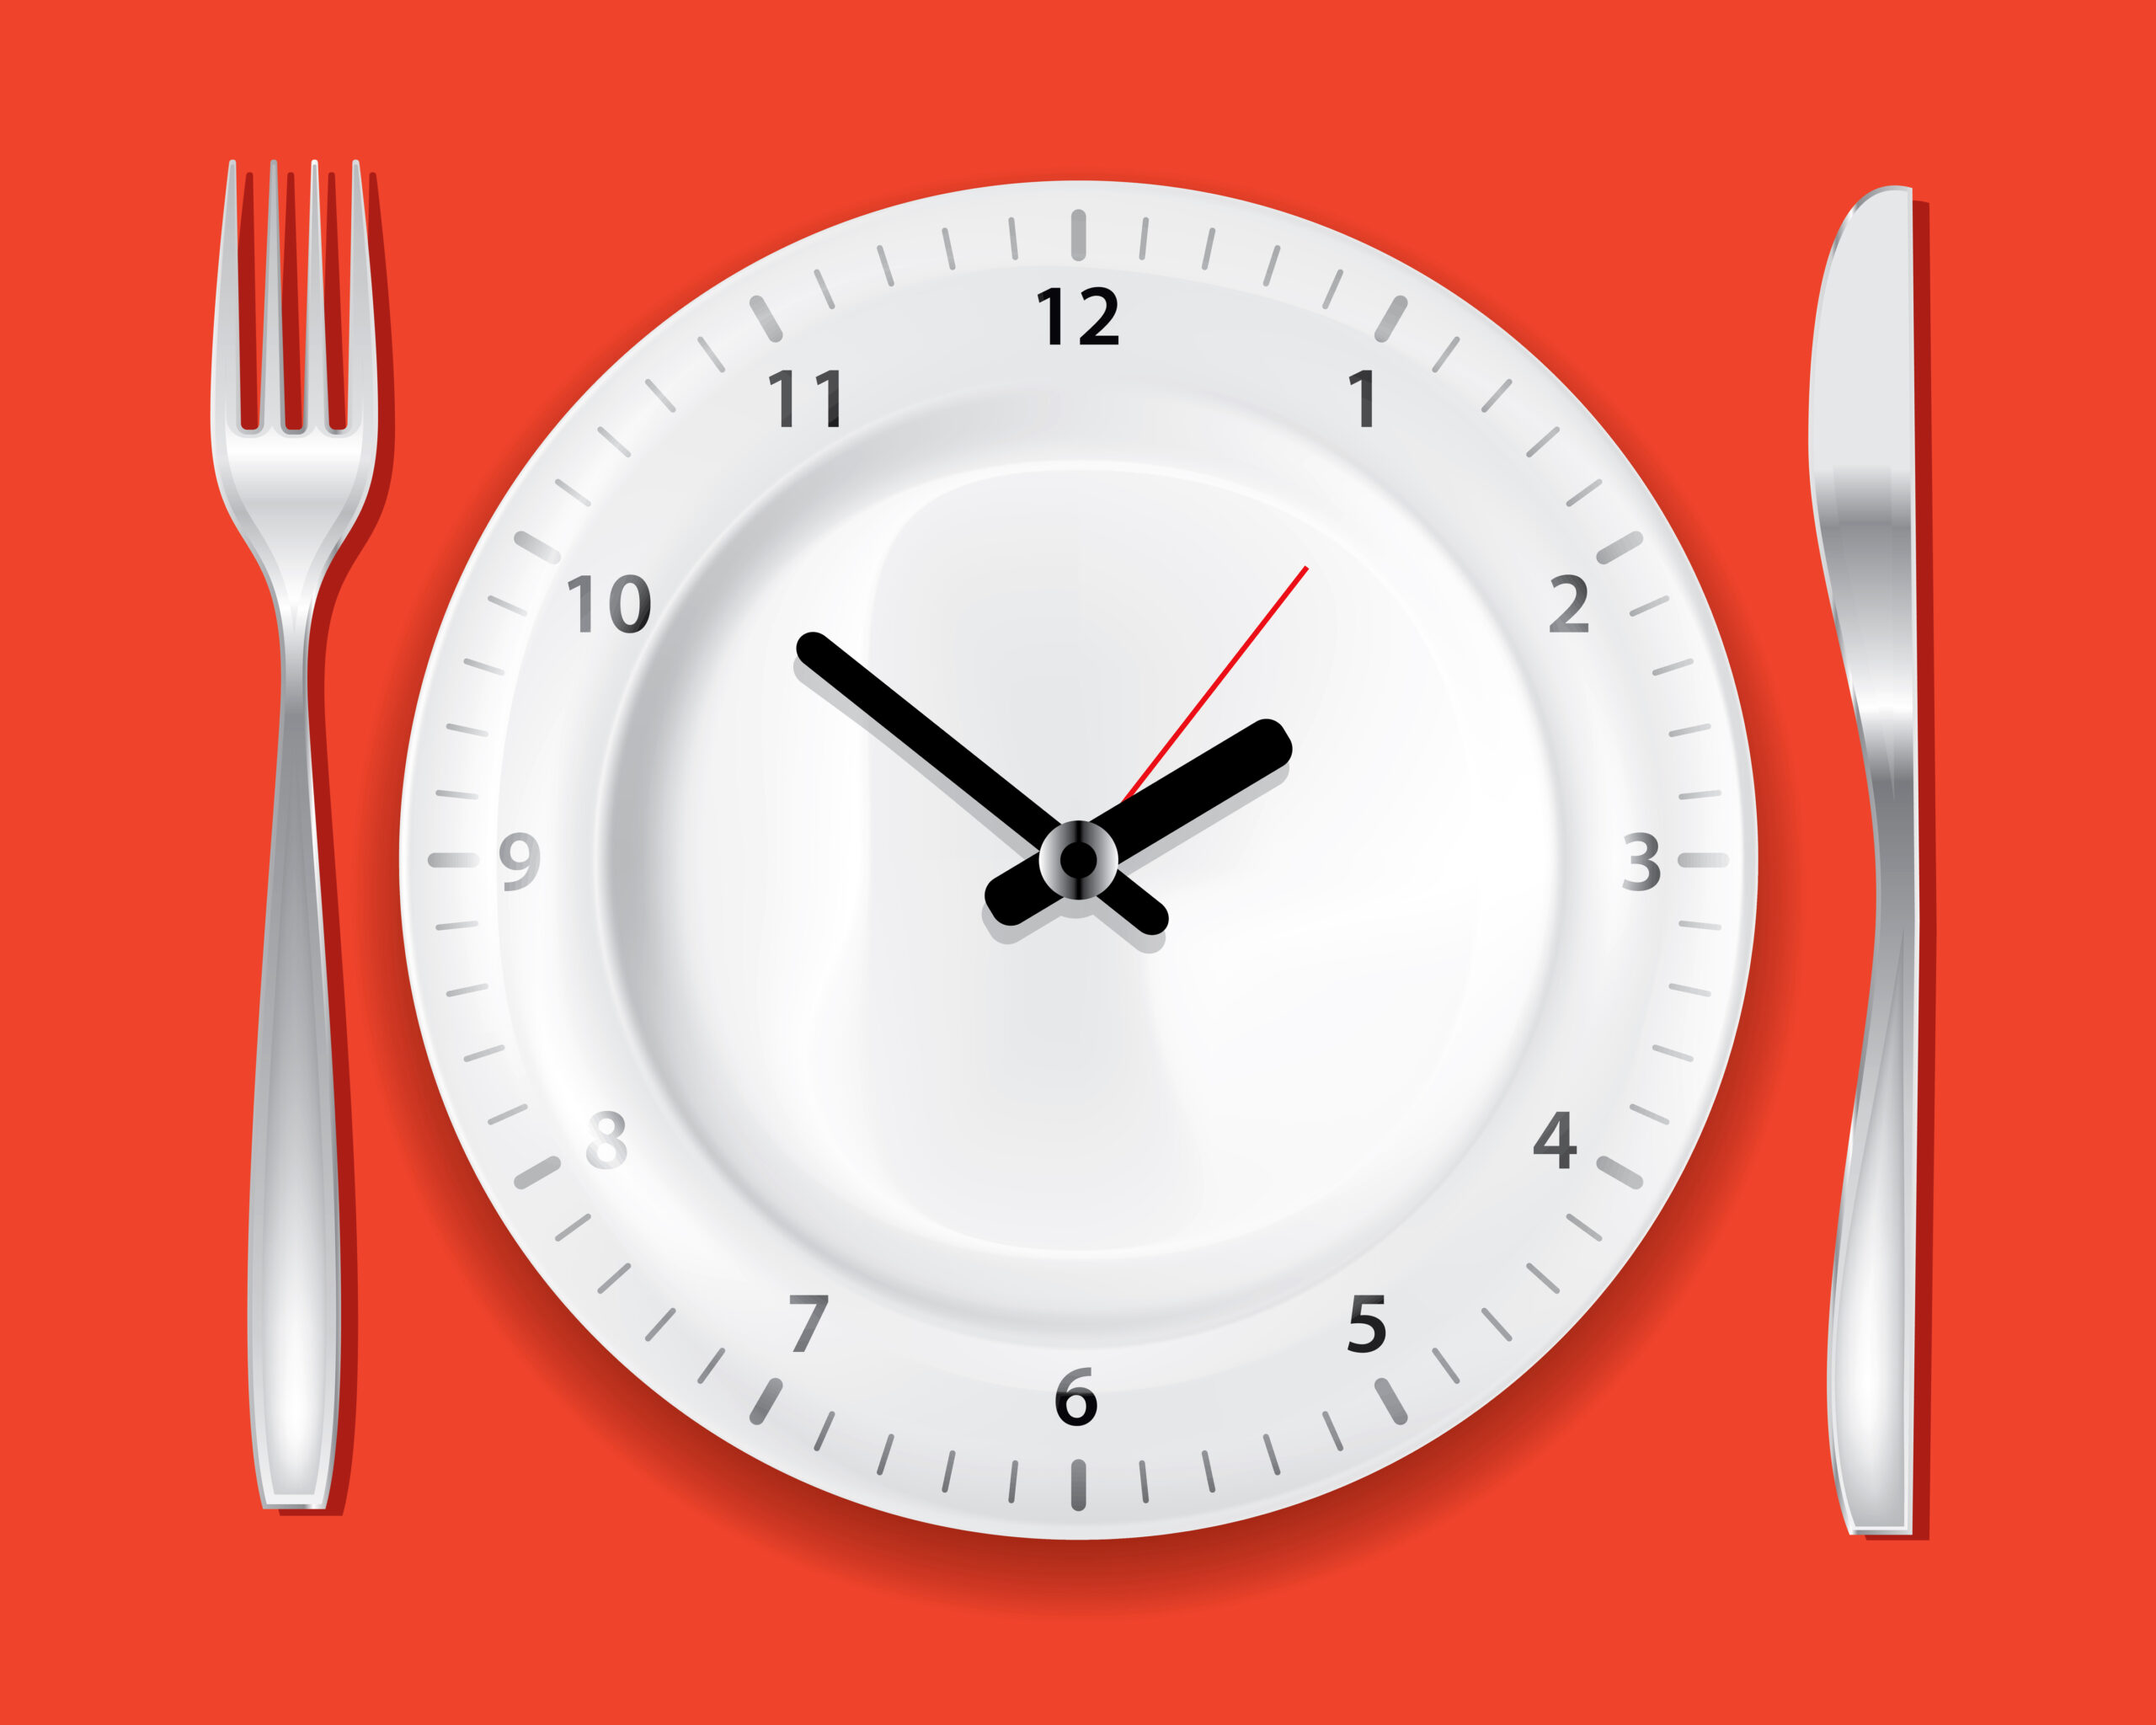 Intermittent fasting can help you lose weight. But can it make you live longer?